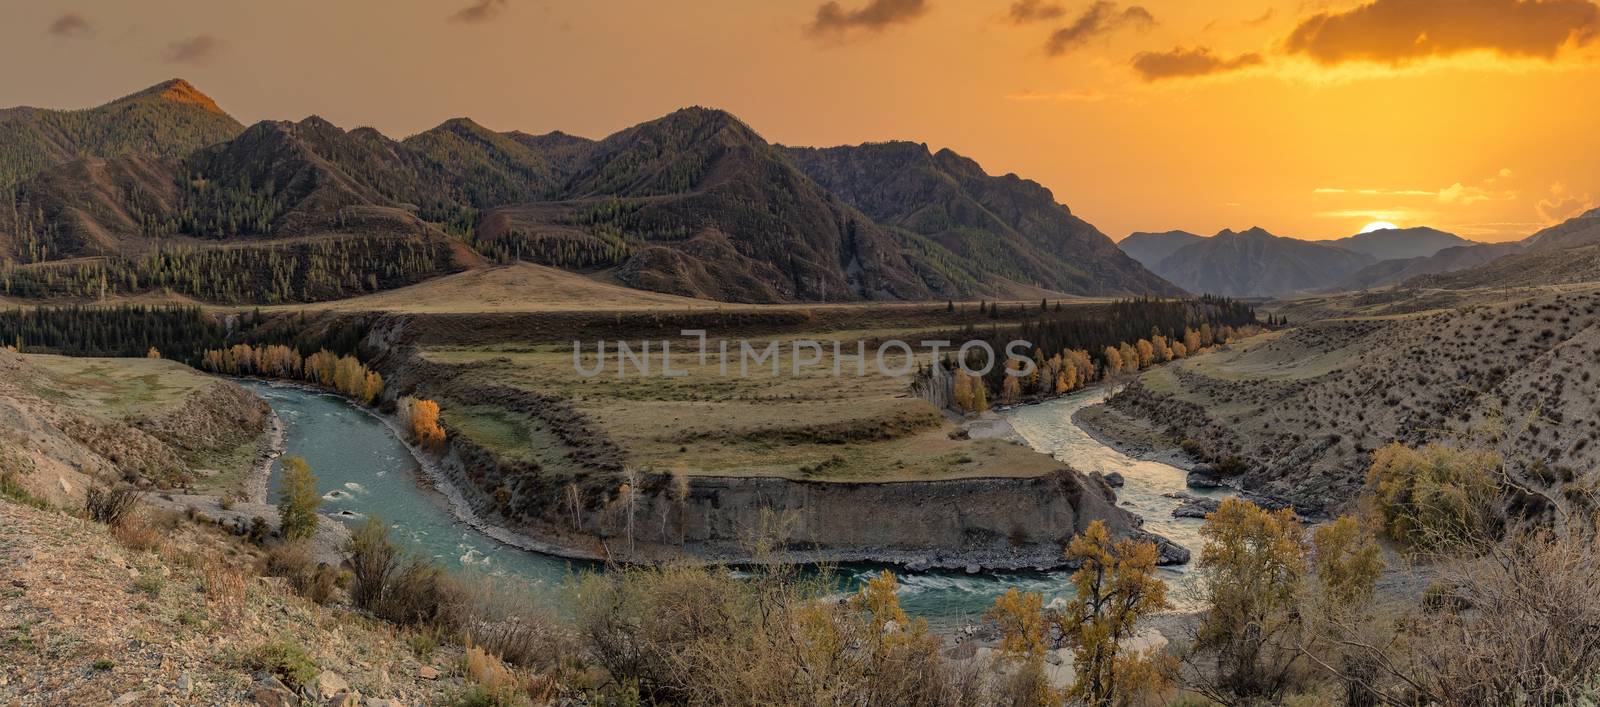 Altai mountains. Beautiful highland autumn panoramic landscape at sunset. Golden hour. Rocky foreground with golden trees and river. Beautiful golden sky and mountains as a background.Russia. Siberia by DamantisZ